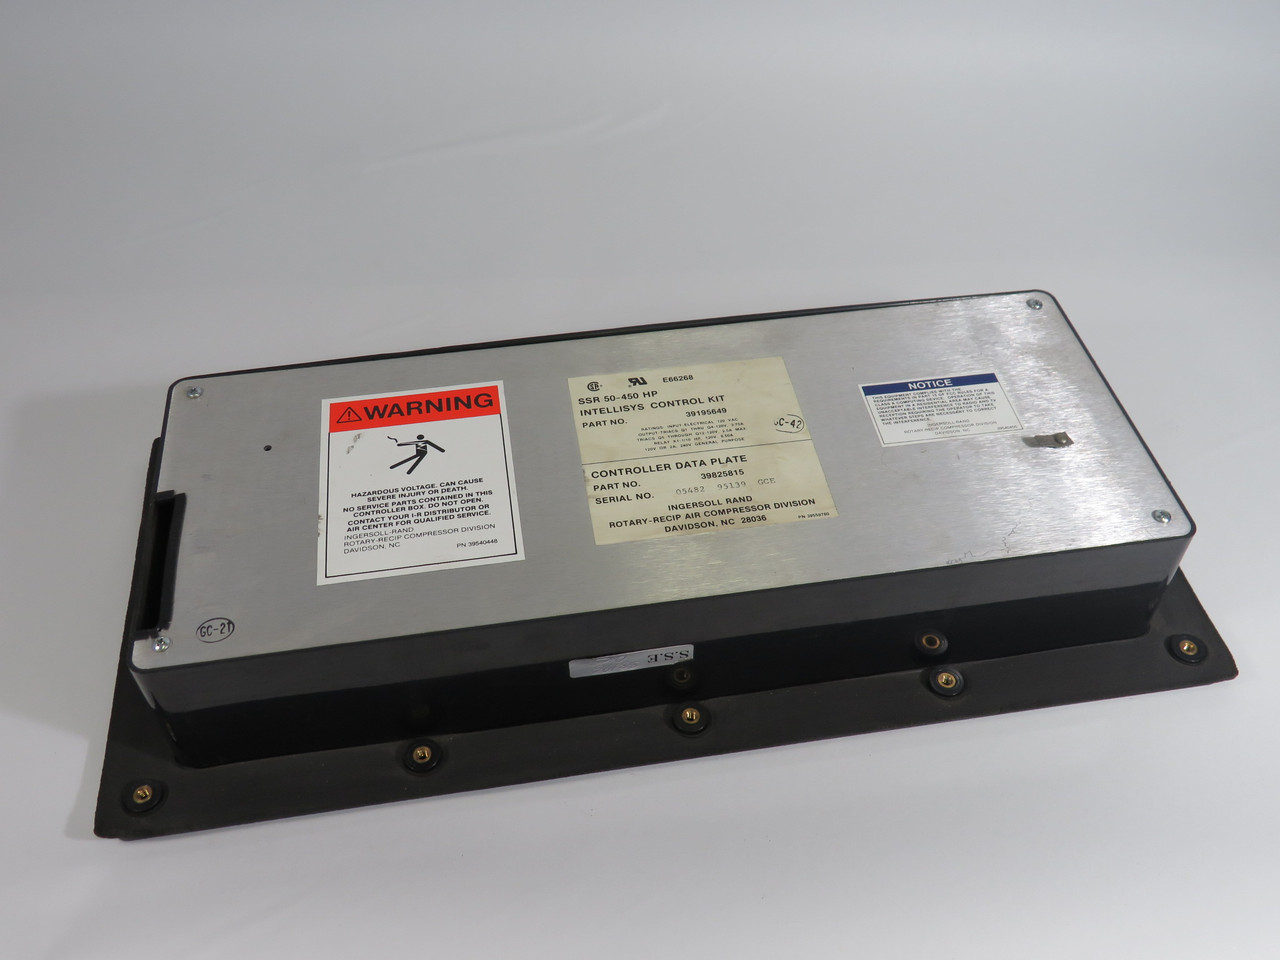 Ingersoll Rand 39195649 Intellisys Control Kit 120VAC 3.75A AS IS